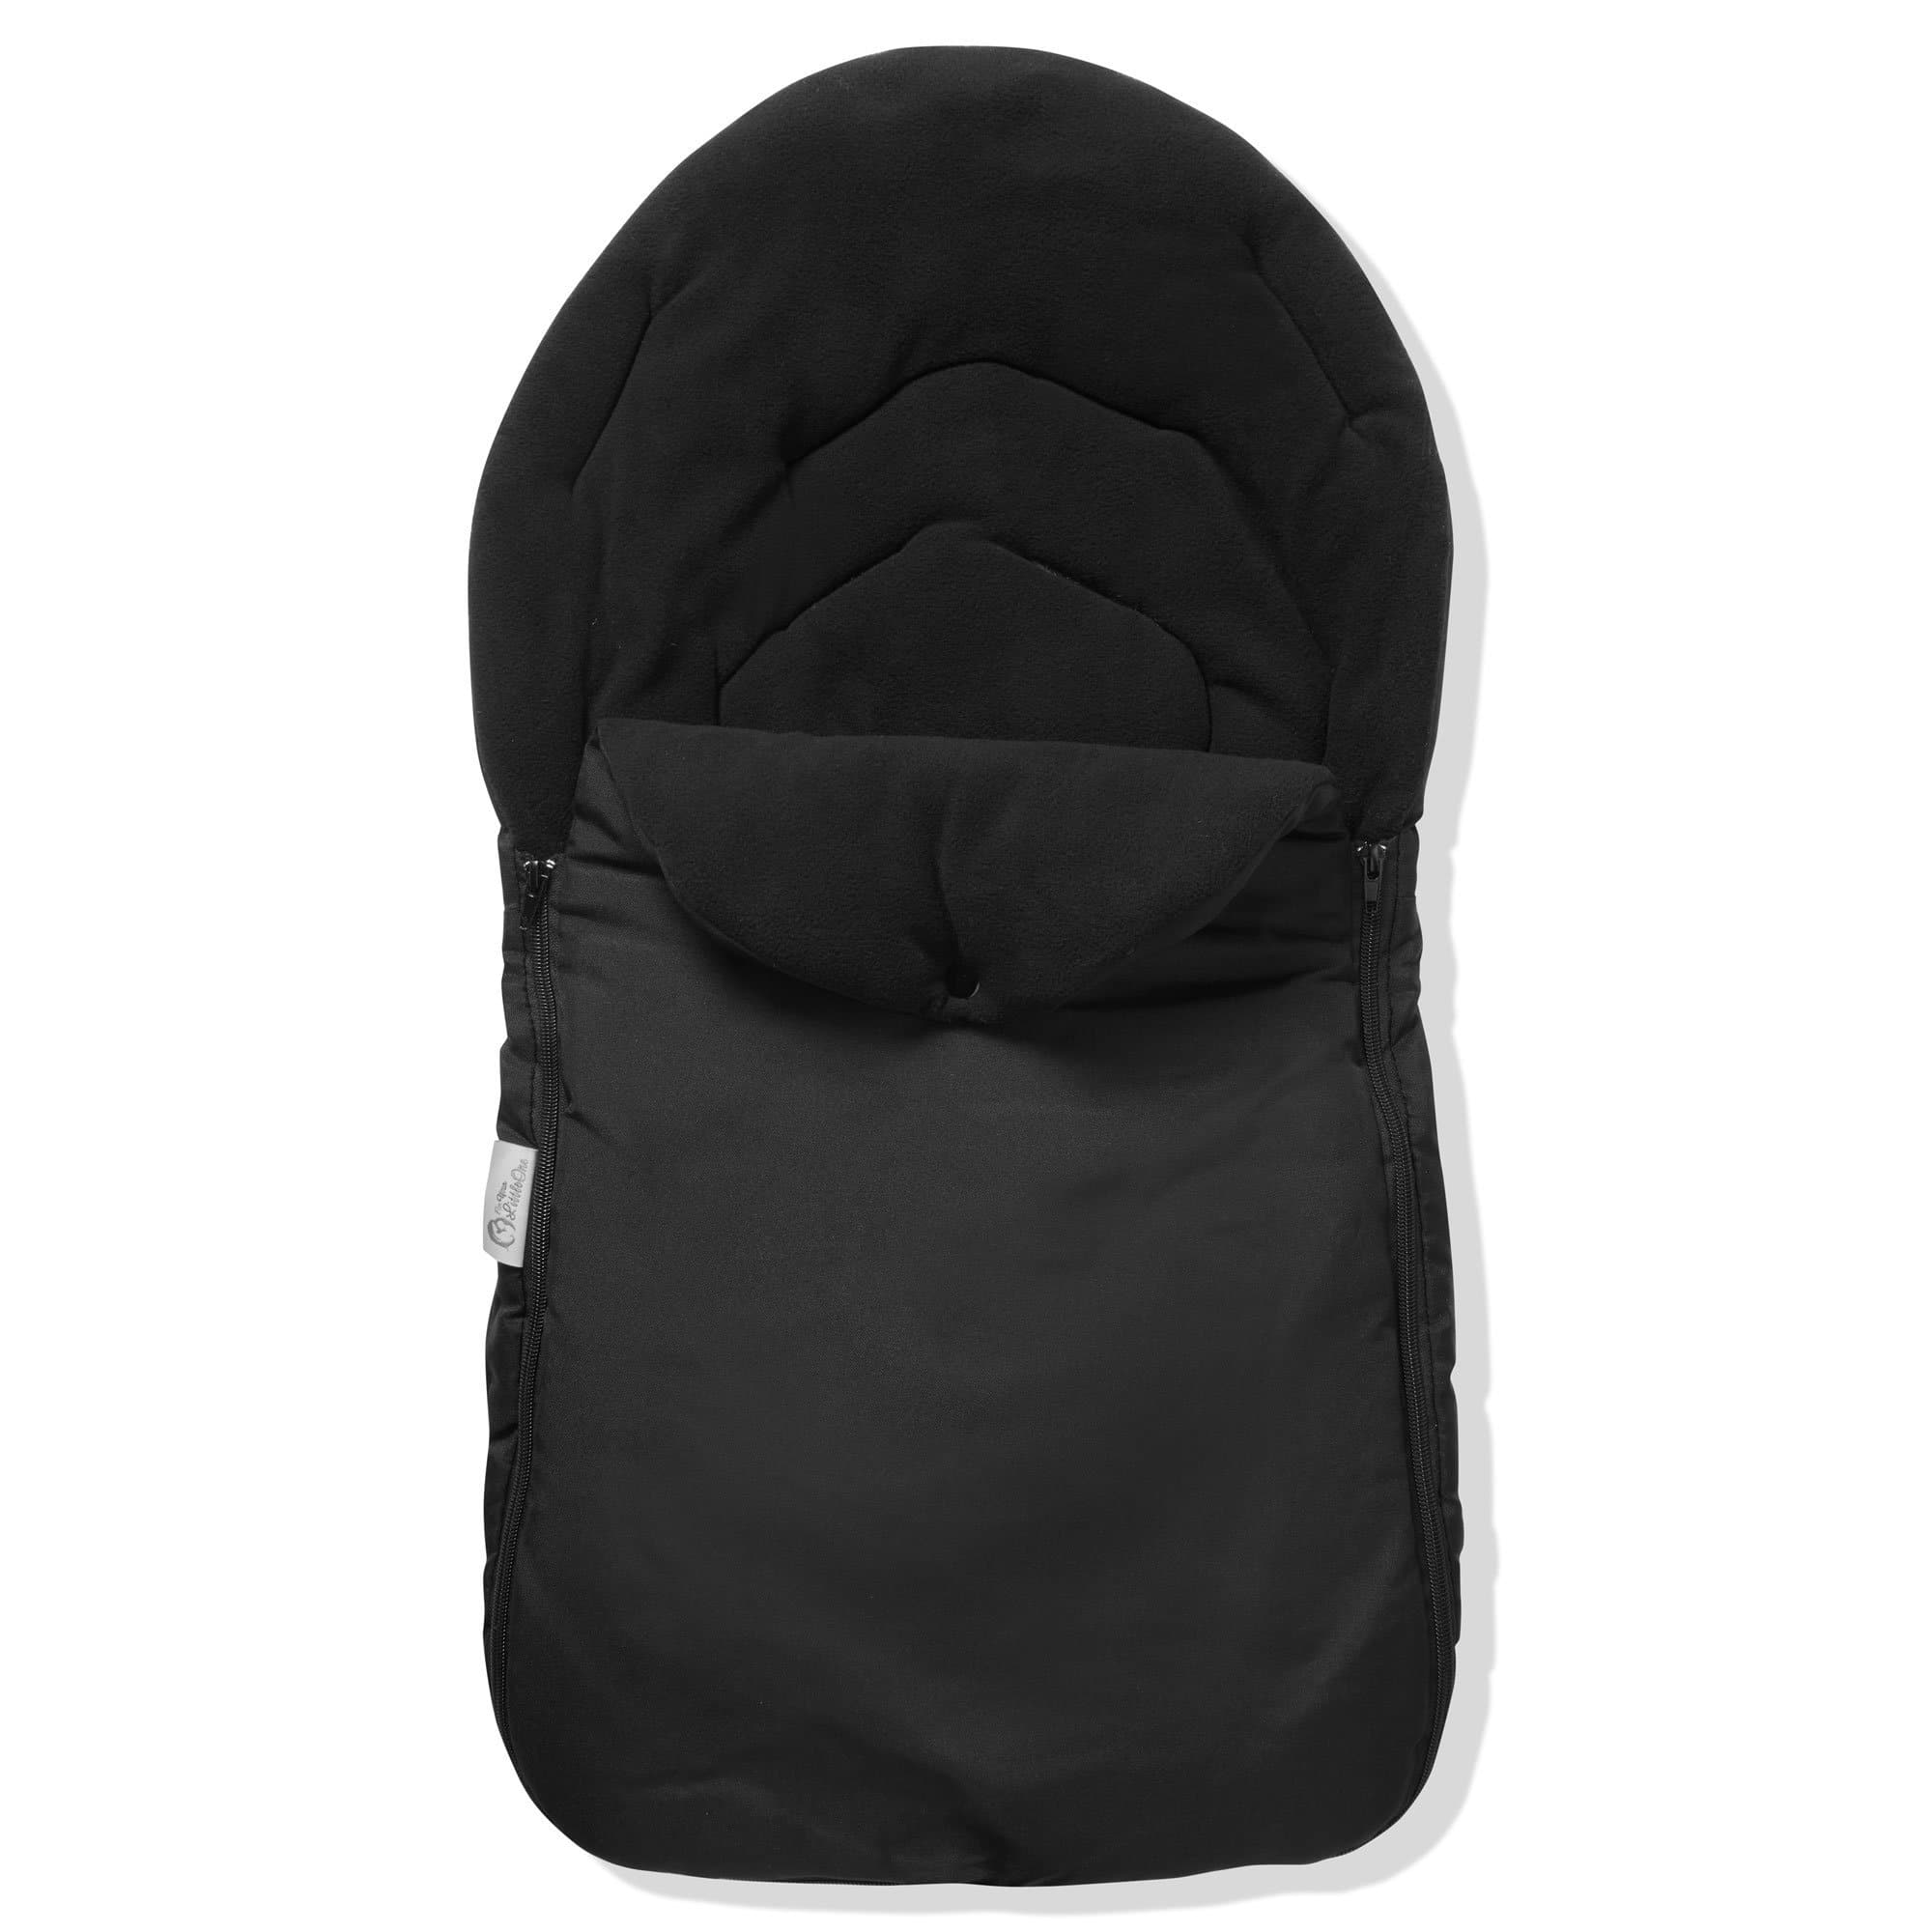 Car Seat Footmuff / Cosy Toes Compatible with Kinderkraft - Black / Fits All Models | For Your Little One